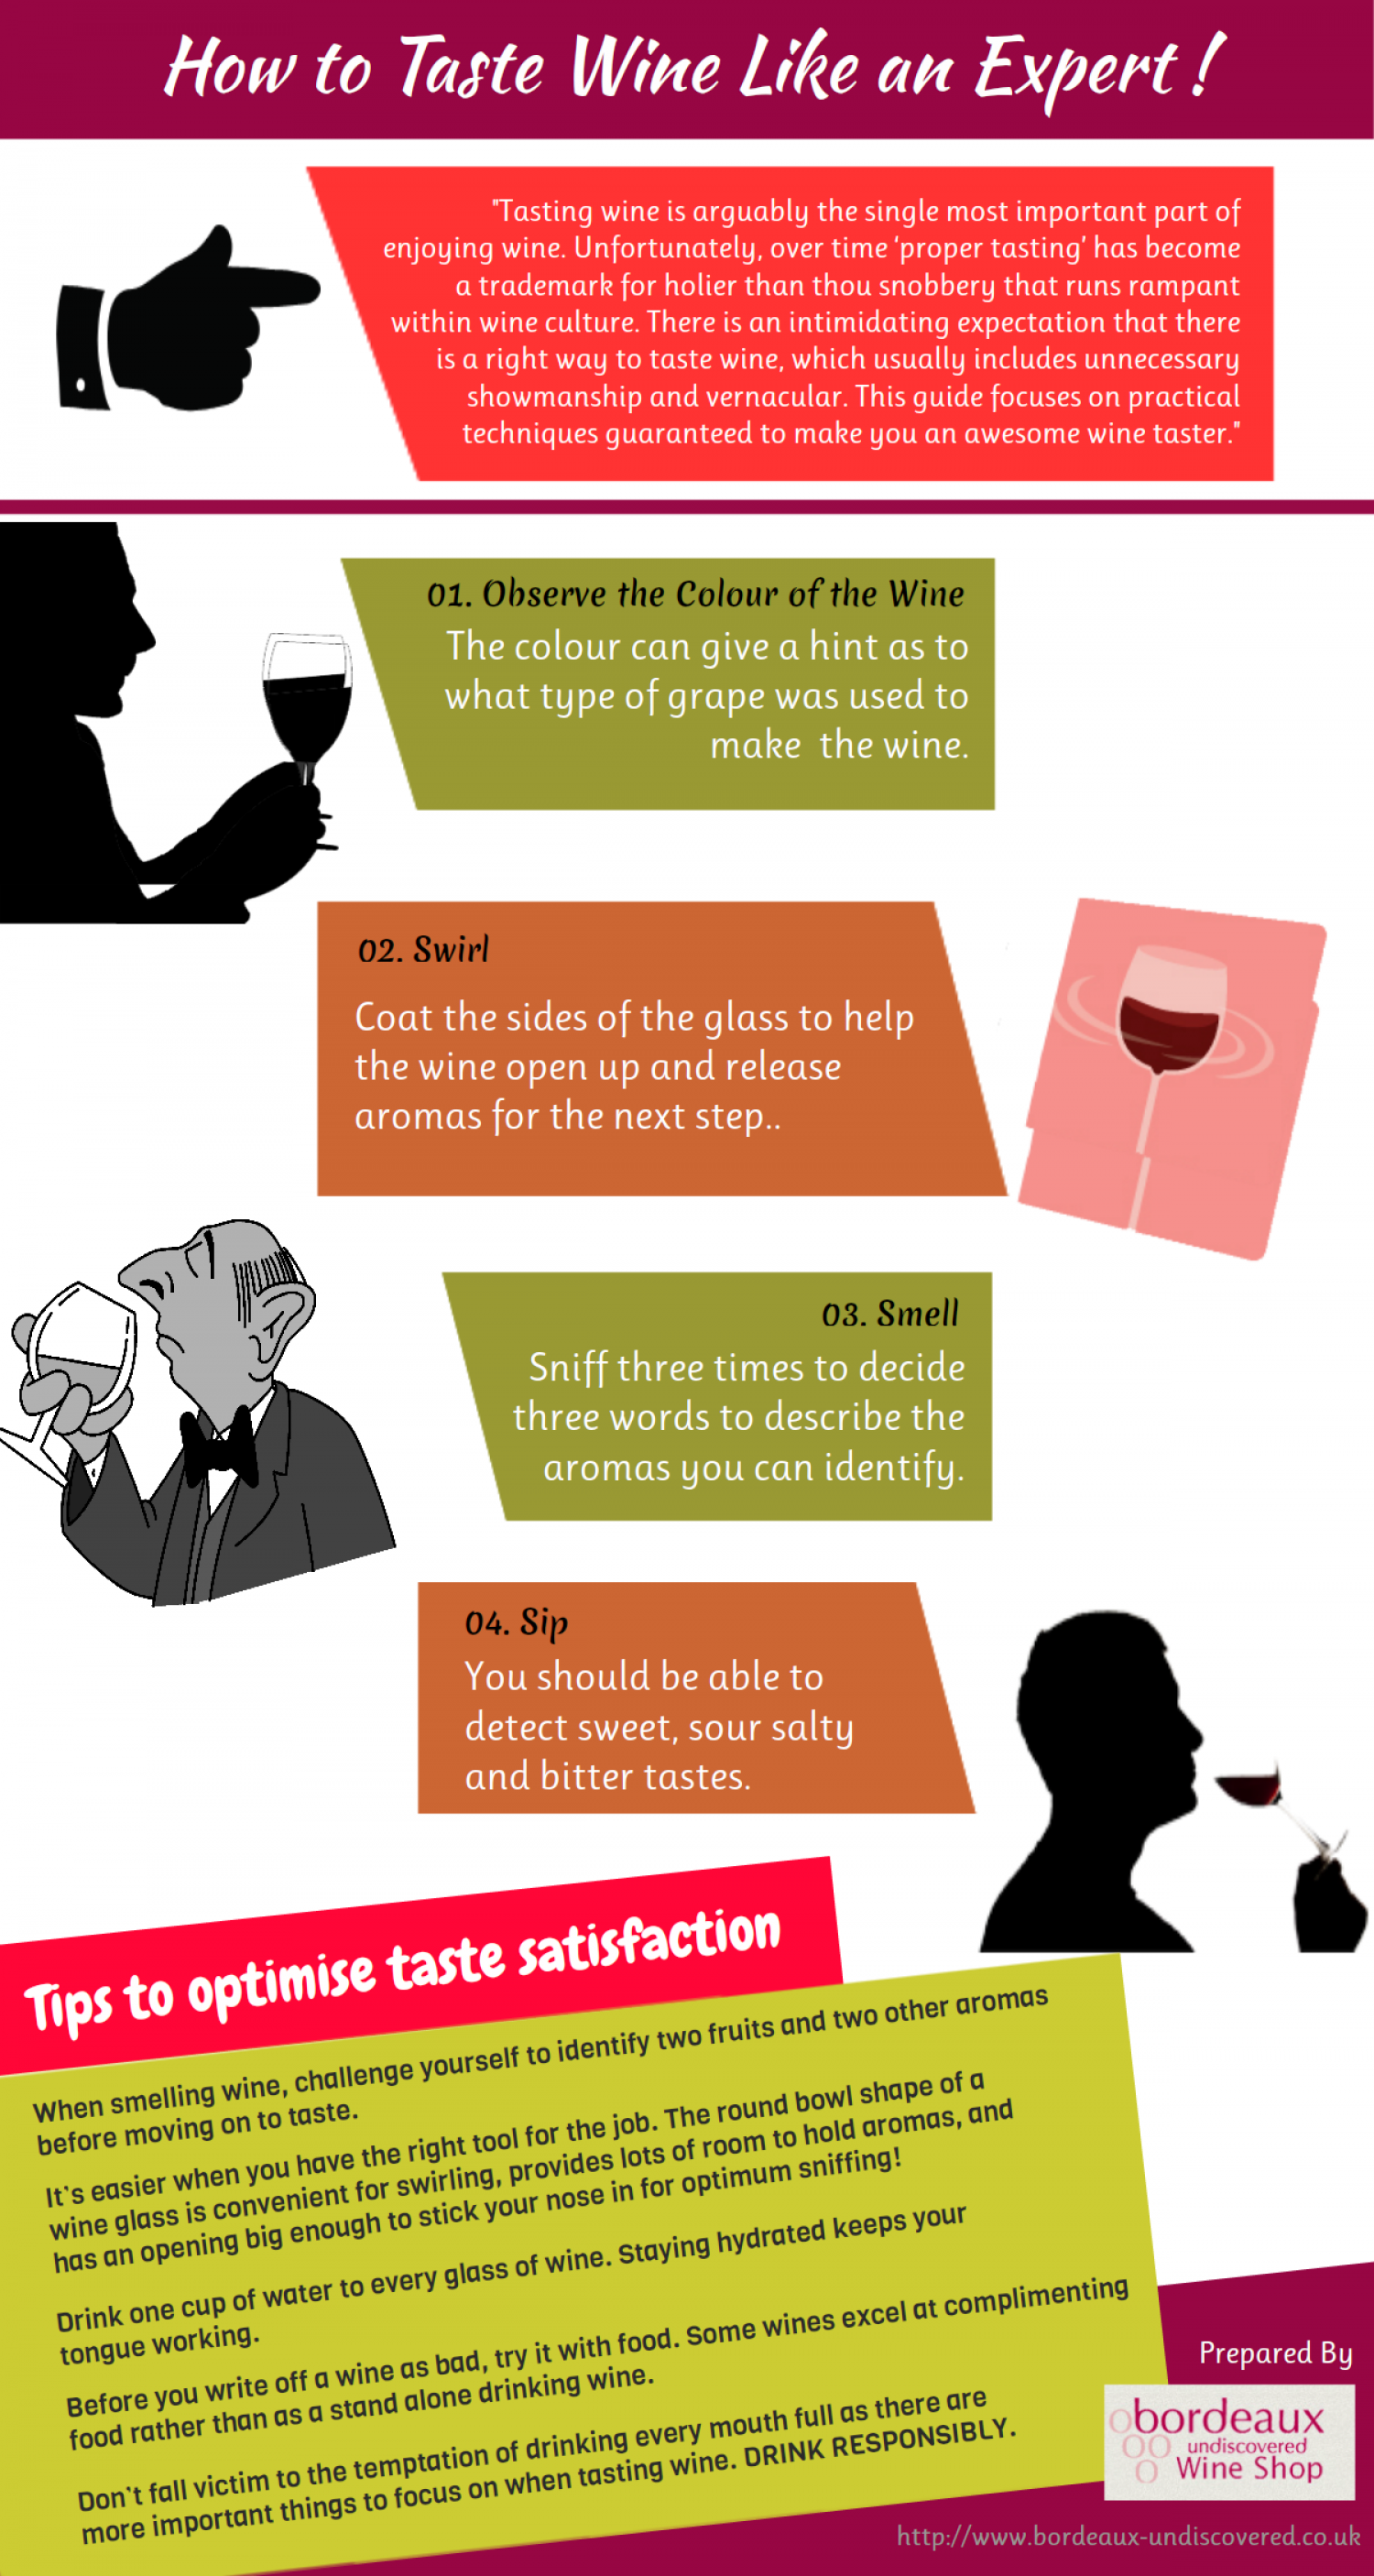 https://i.visual.ly/images/how-to-taste-wine-like-an-expert_512ca11b5cdd8_w1500.png